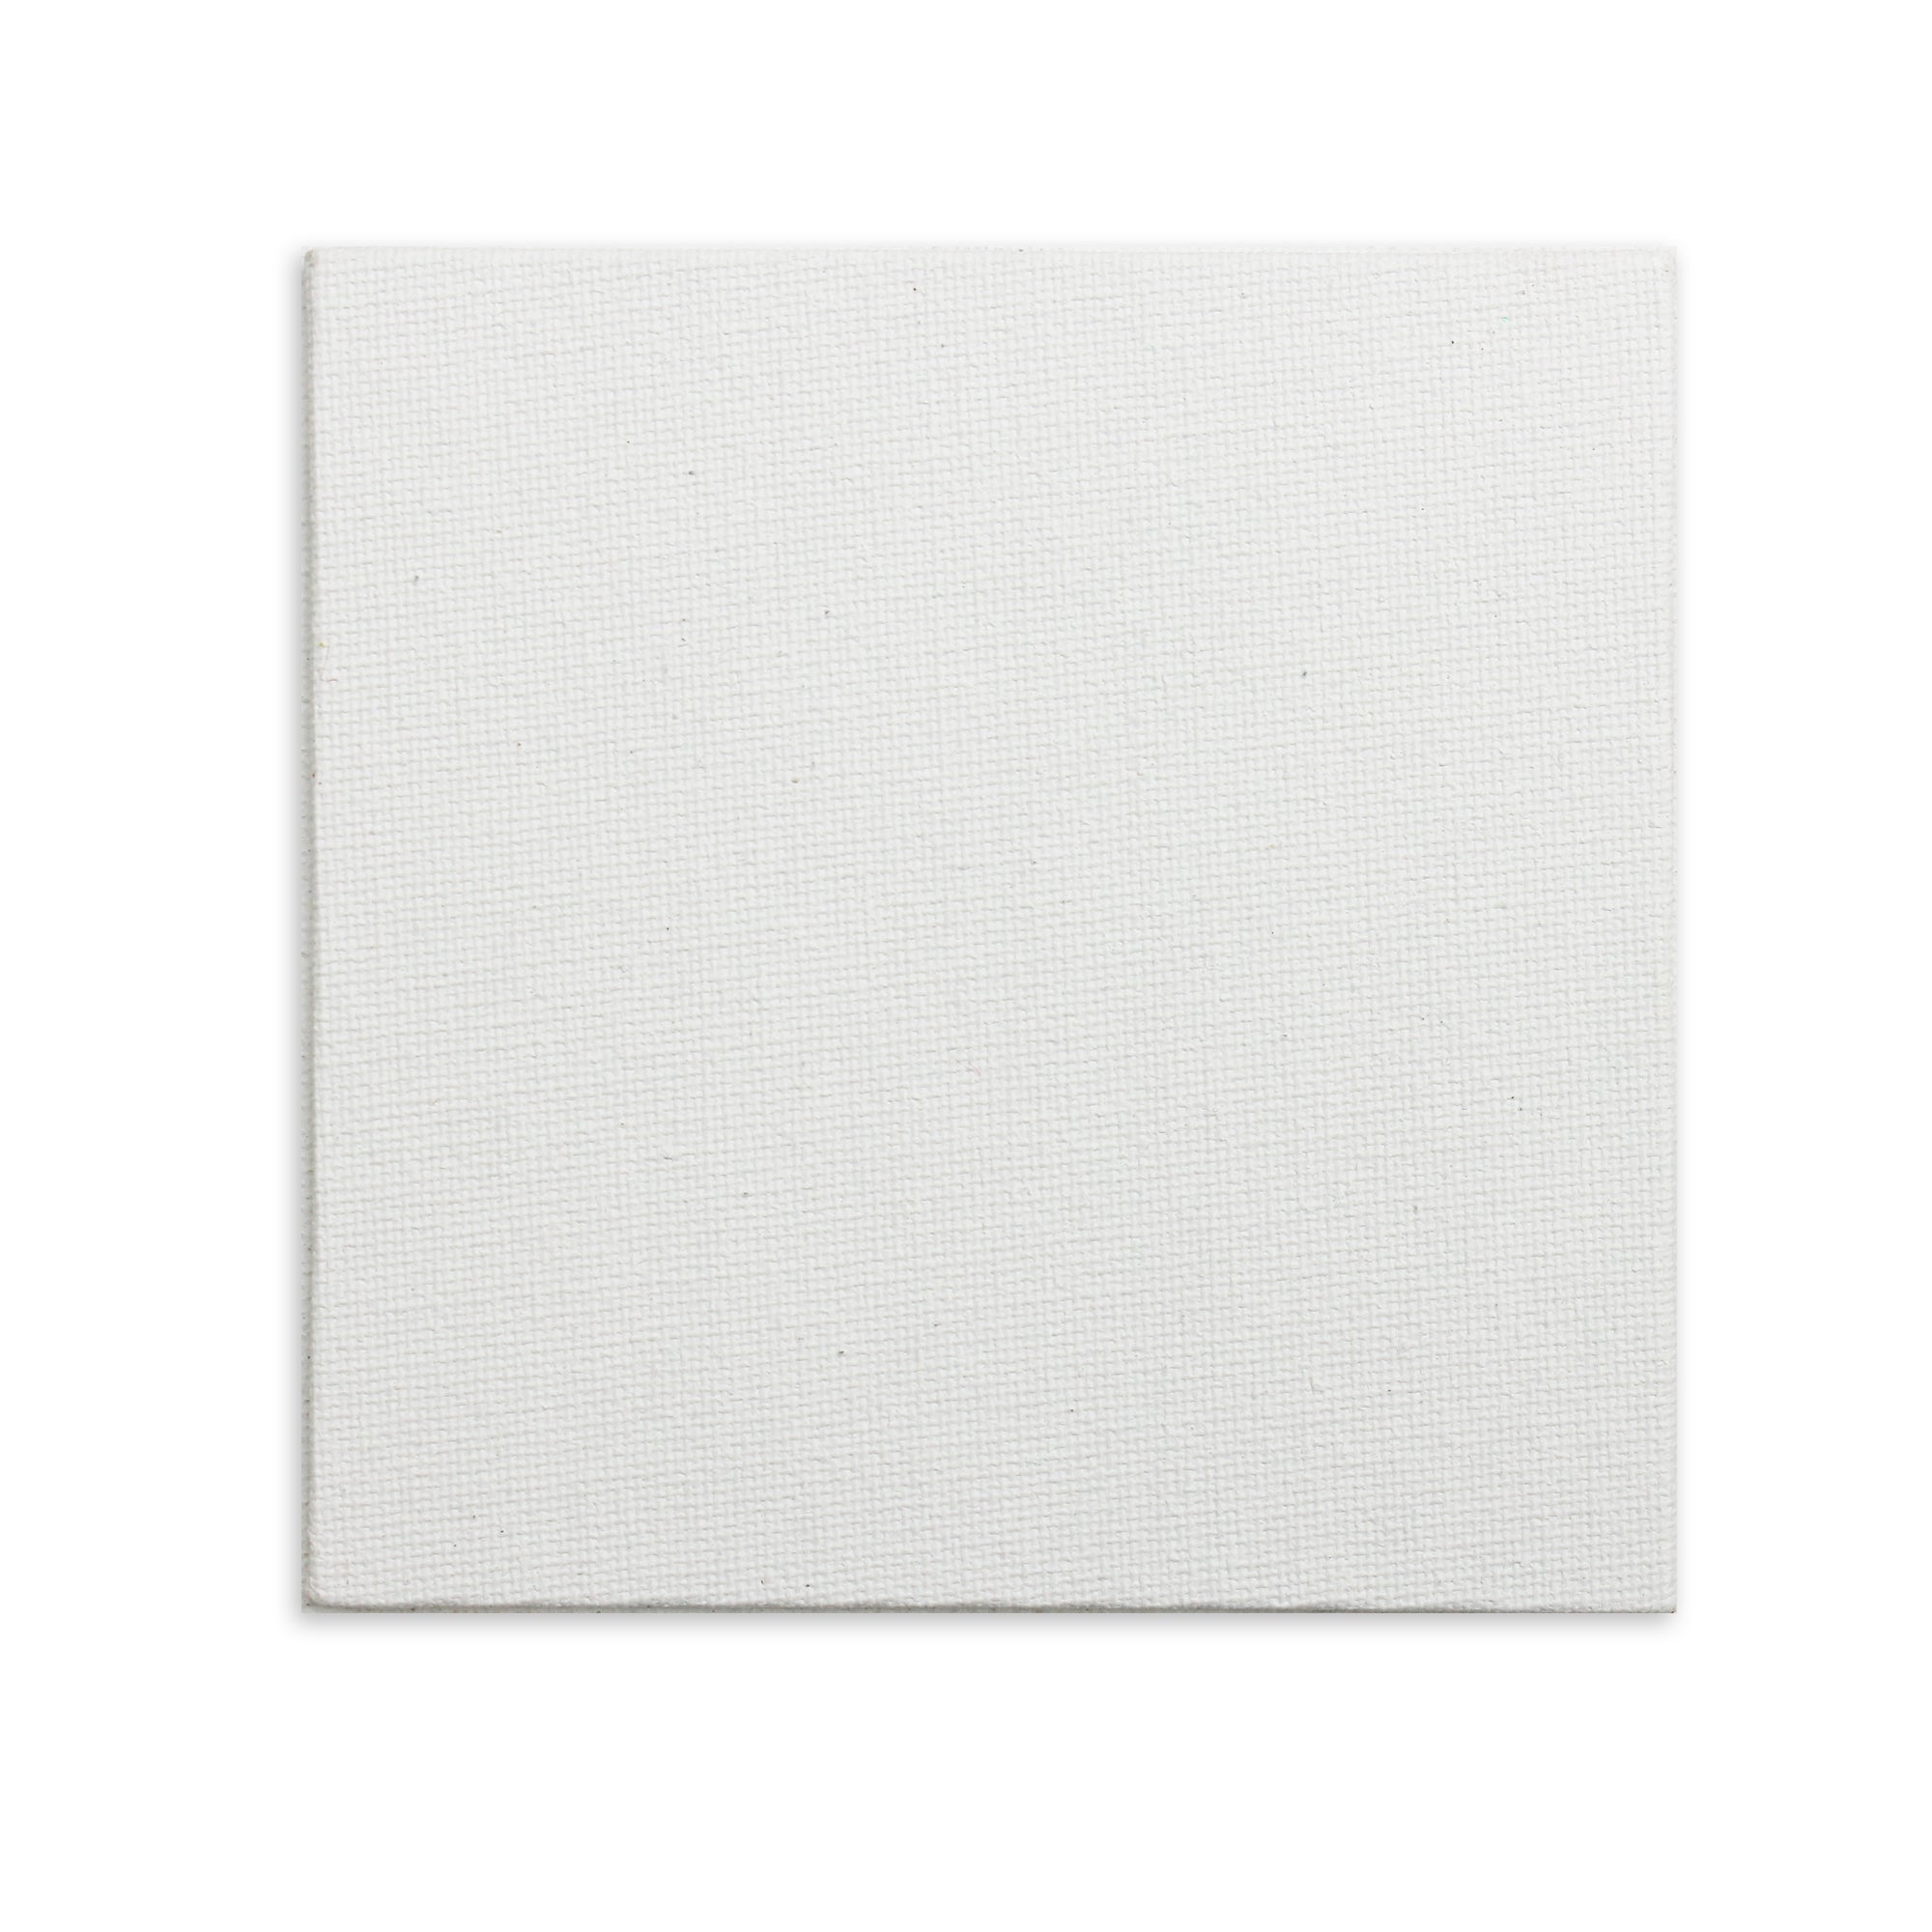 Canvas Panel 6 X 6Inch 2Mm Thick Mdf Board 3Pcs As